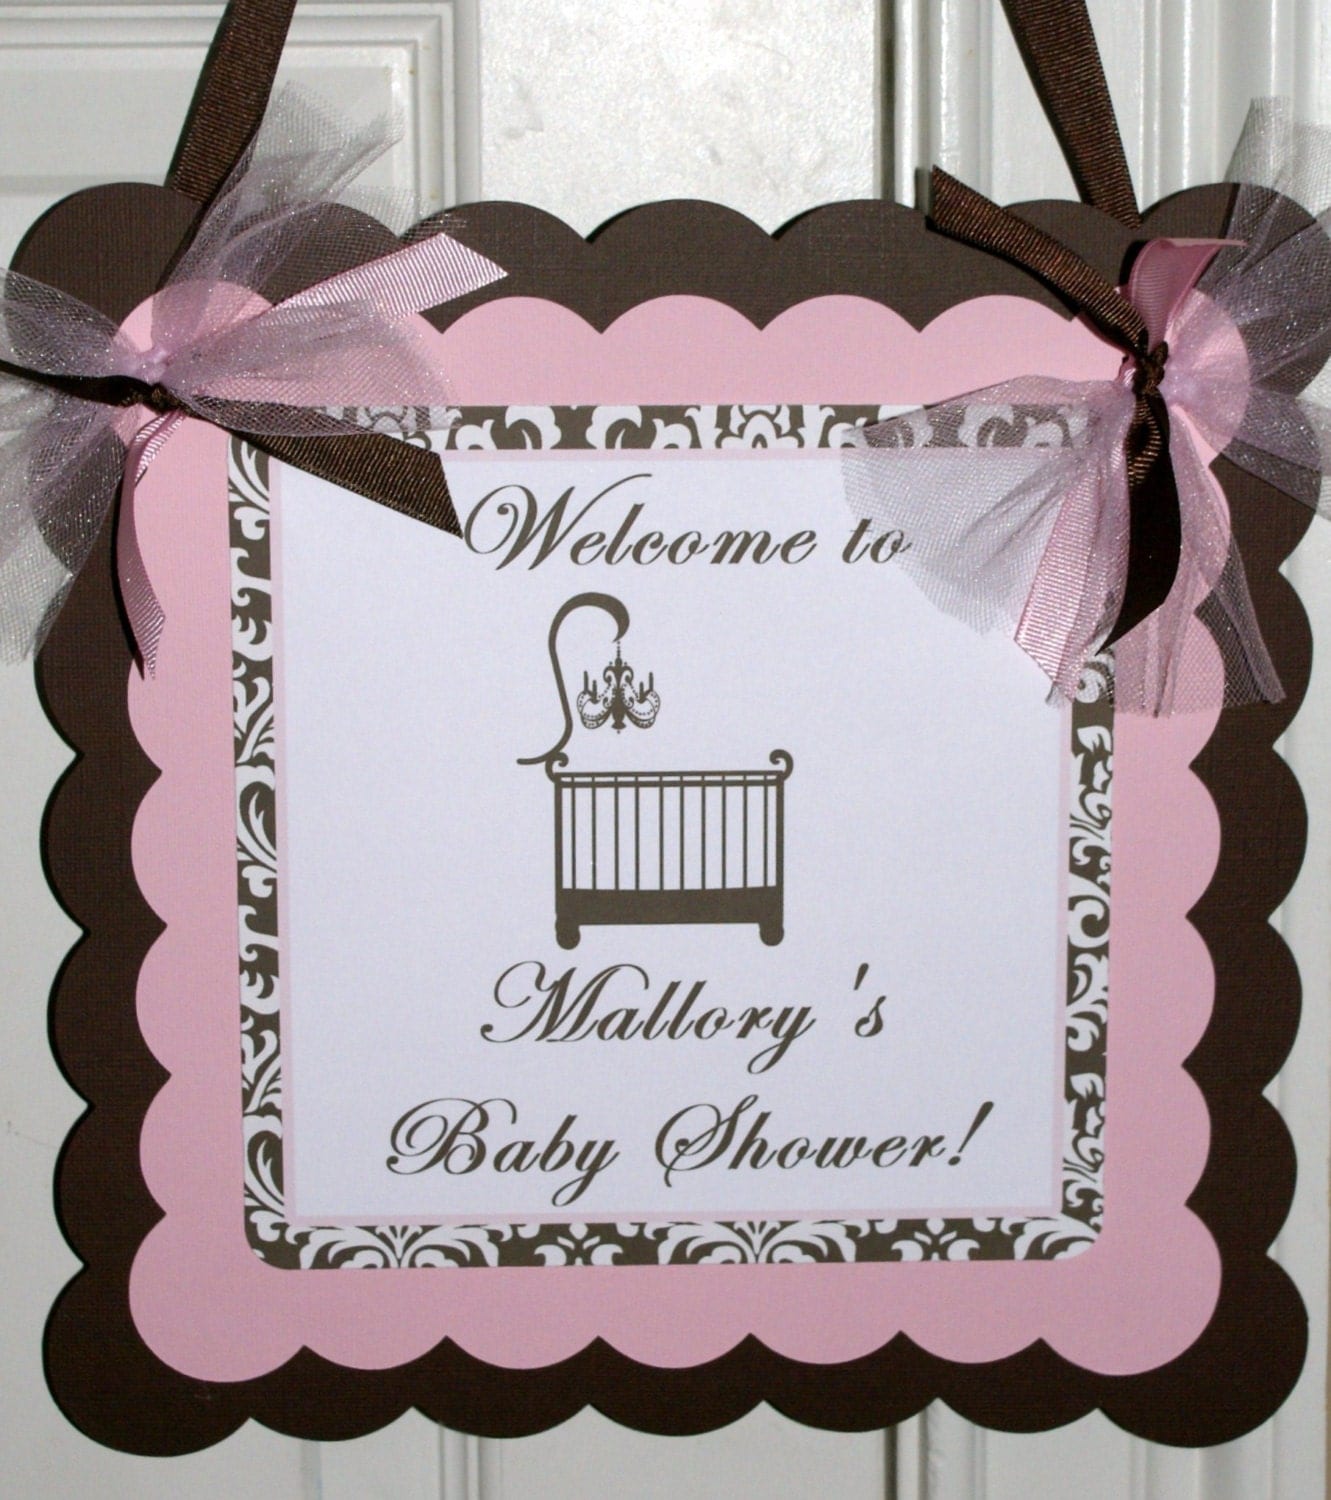 Popular items for brown baby shower on Etsy